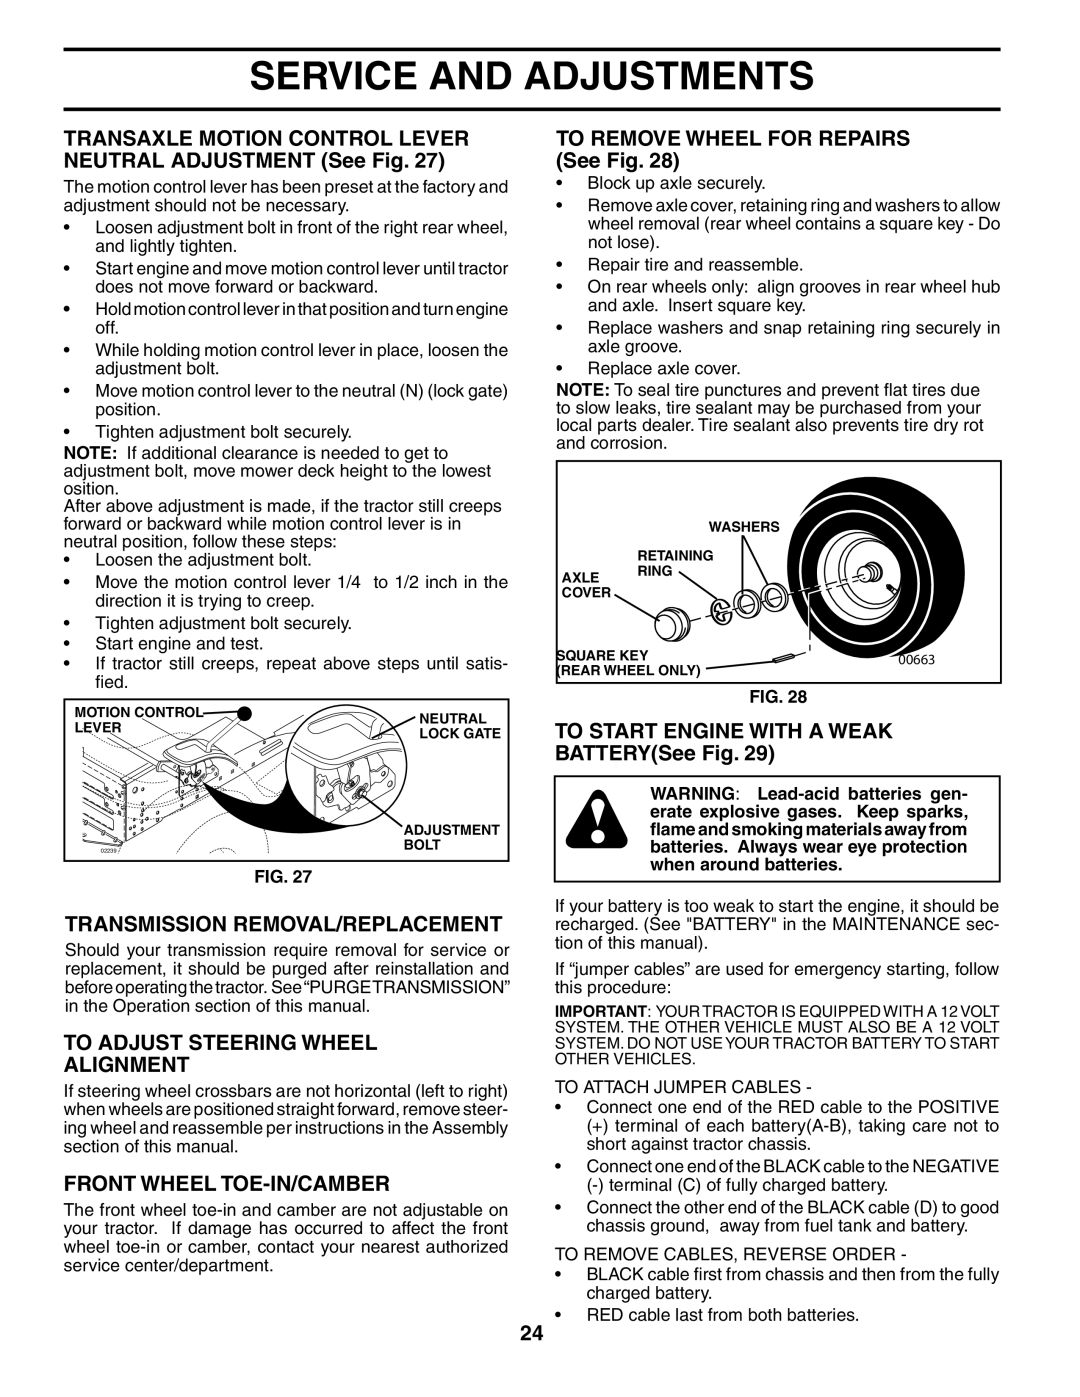 Husqvarna YTH2148 TO REMOVE WHEEL FOR REPAIRS See Fig, Transmission Removal/Replacement, Front Wheel Toe-In/Camber 